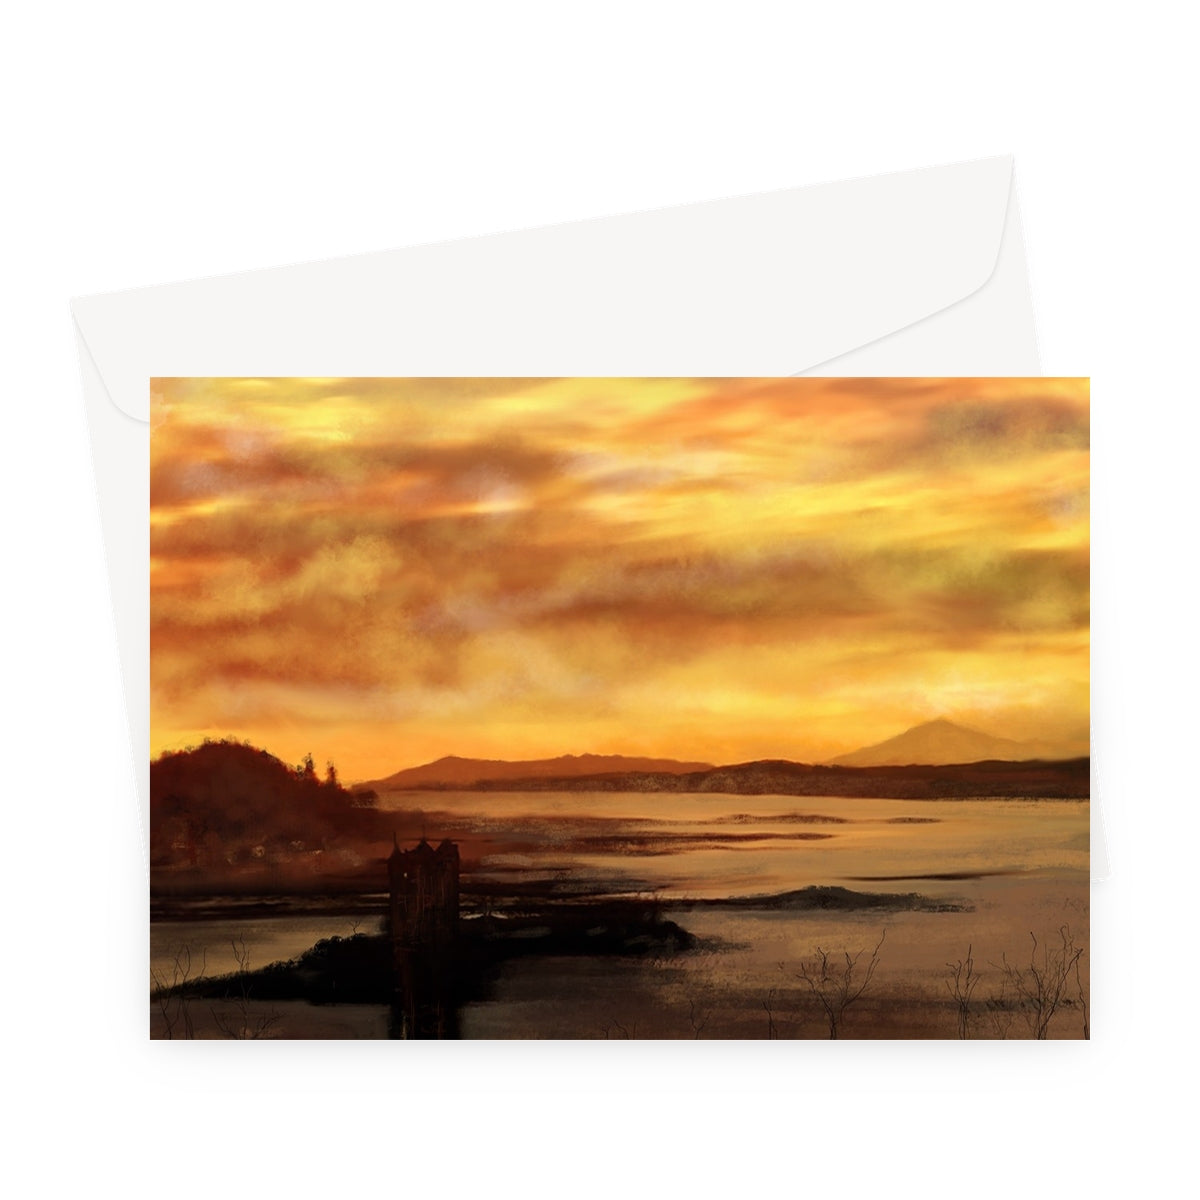 Castle Stalker Dusk Art Gifts Greeting Card-Greetings Cards-Historic & Iconic Scotland Art Gallery-A5 Landscape-1 Card-Paintings, Prints, Homeware, Art Gifts From Scotland By Scottish Artist Kevin Hunter